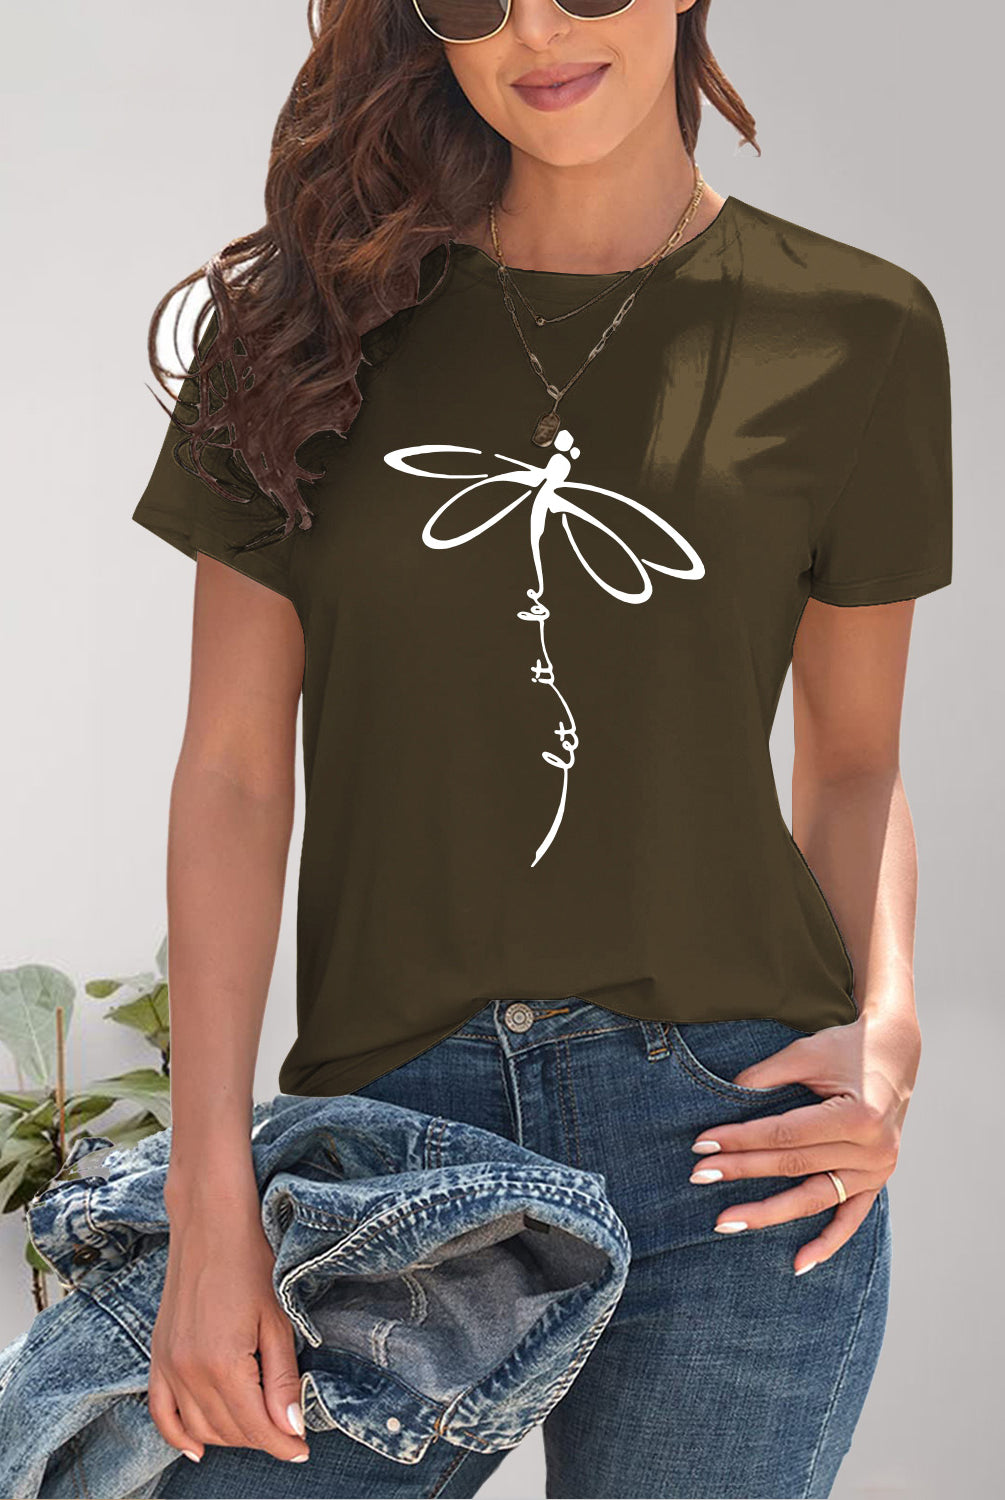 Fashionable woman wearing a black short sleeve tee featuring a bold dragonfly graphic, pairing it with casual denim for a day out.